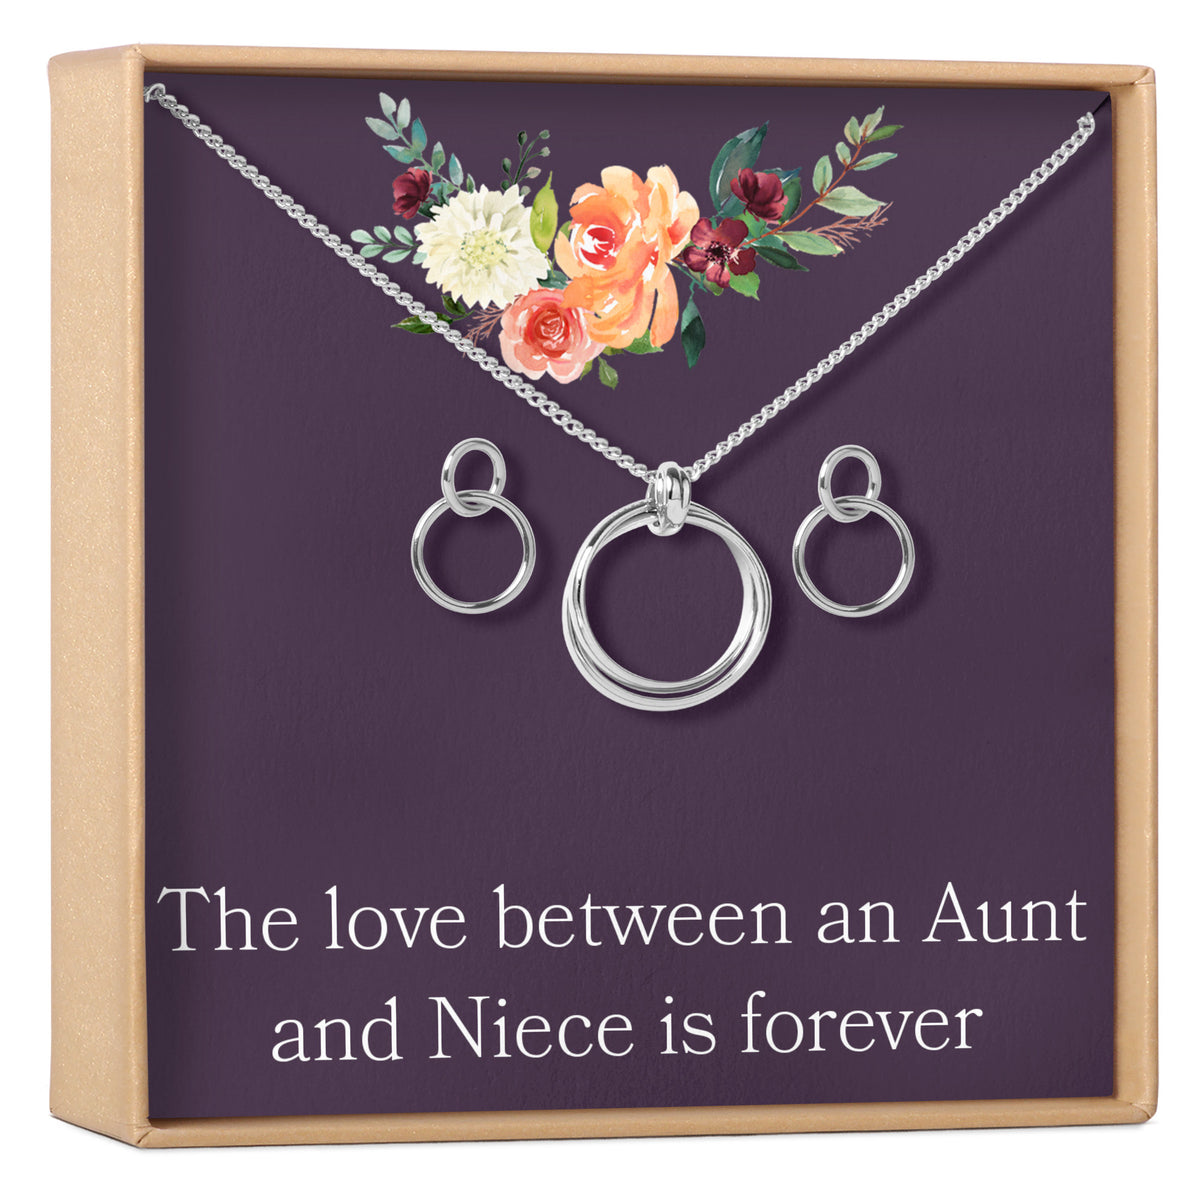 Aunt-Niece Linked Circles Earring and Necklace Jewelry Set